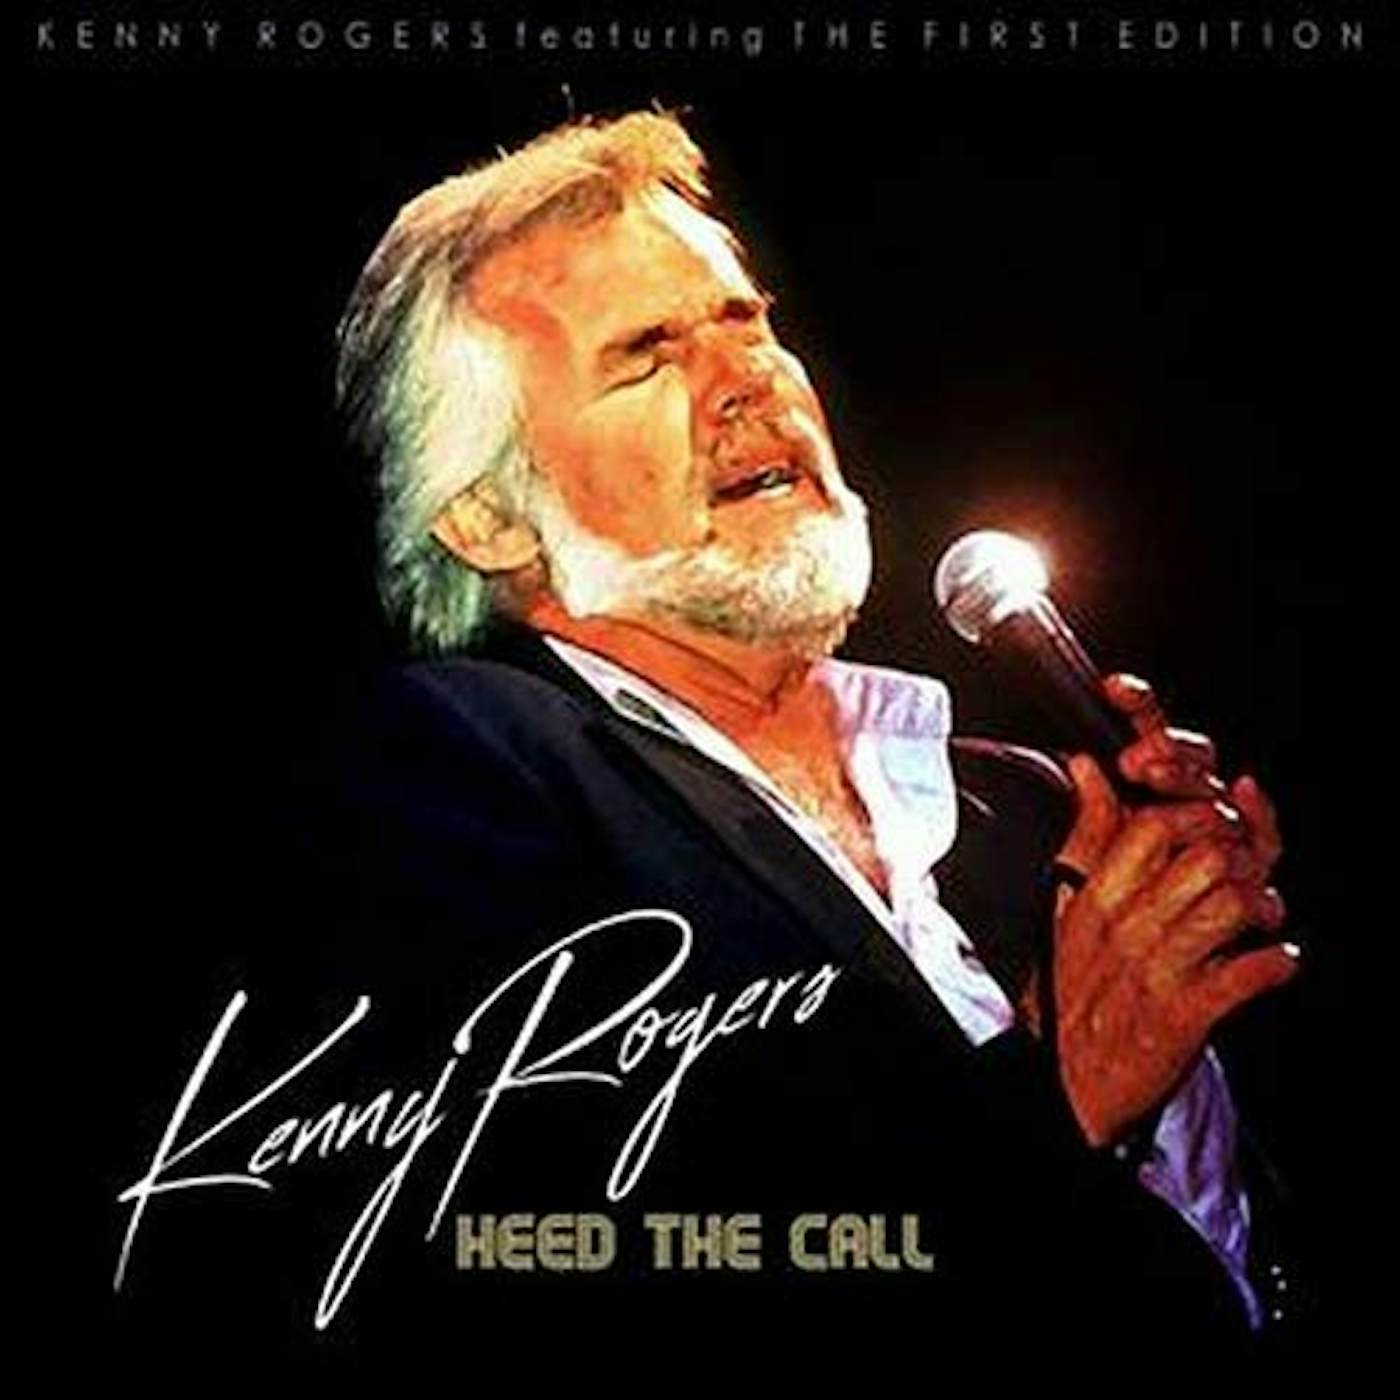 Kenny Rogers HEED THE CALL Vinyl Record